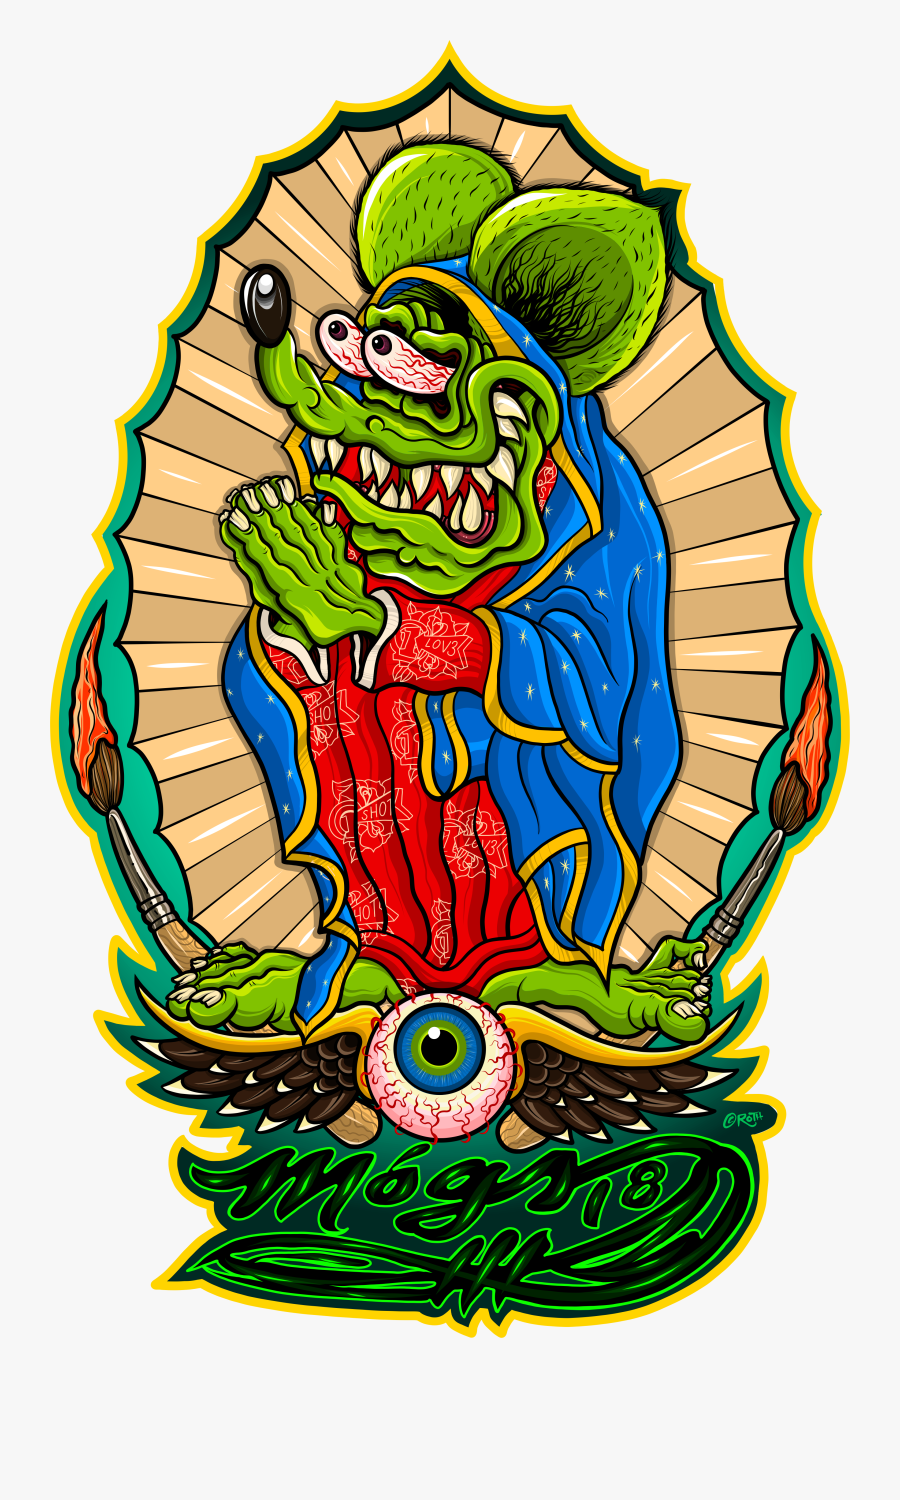 Image Of Virgin Mary Stickers - Rat Fink Virgin Mary, Transparent Clipart